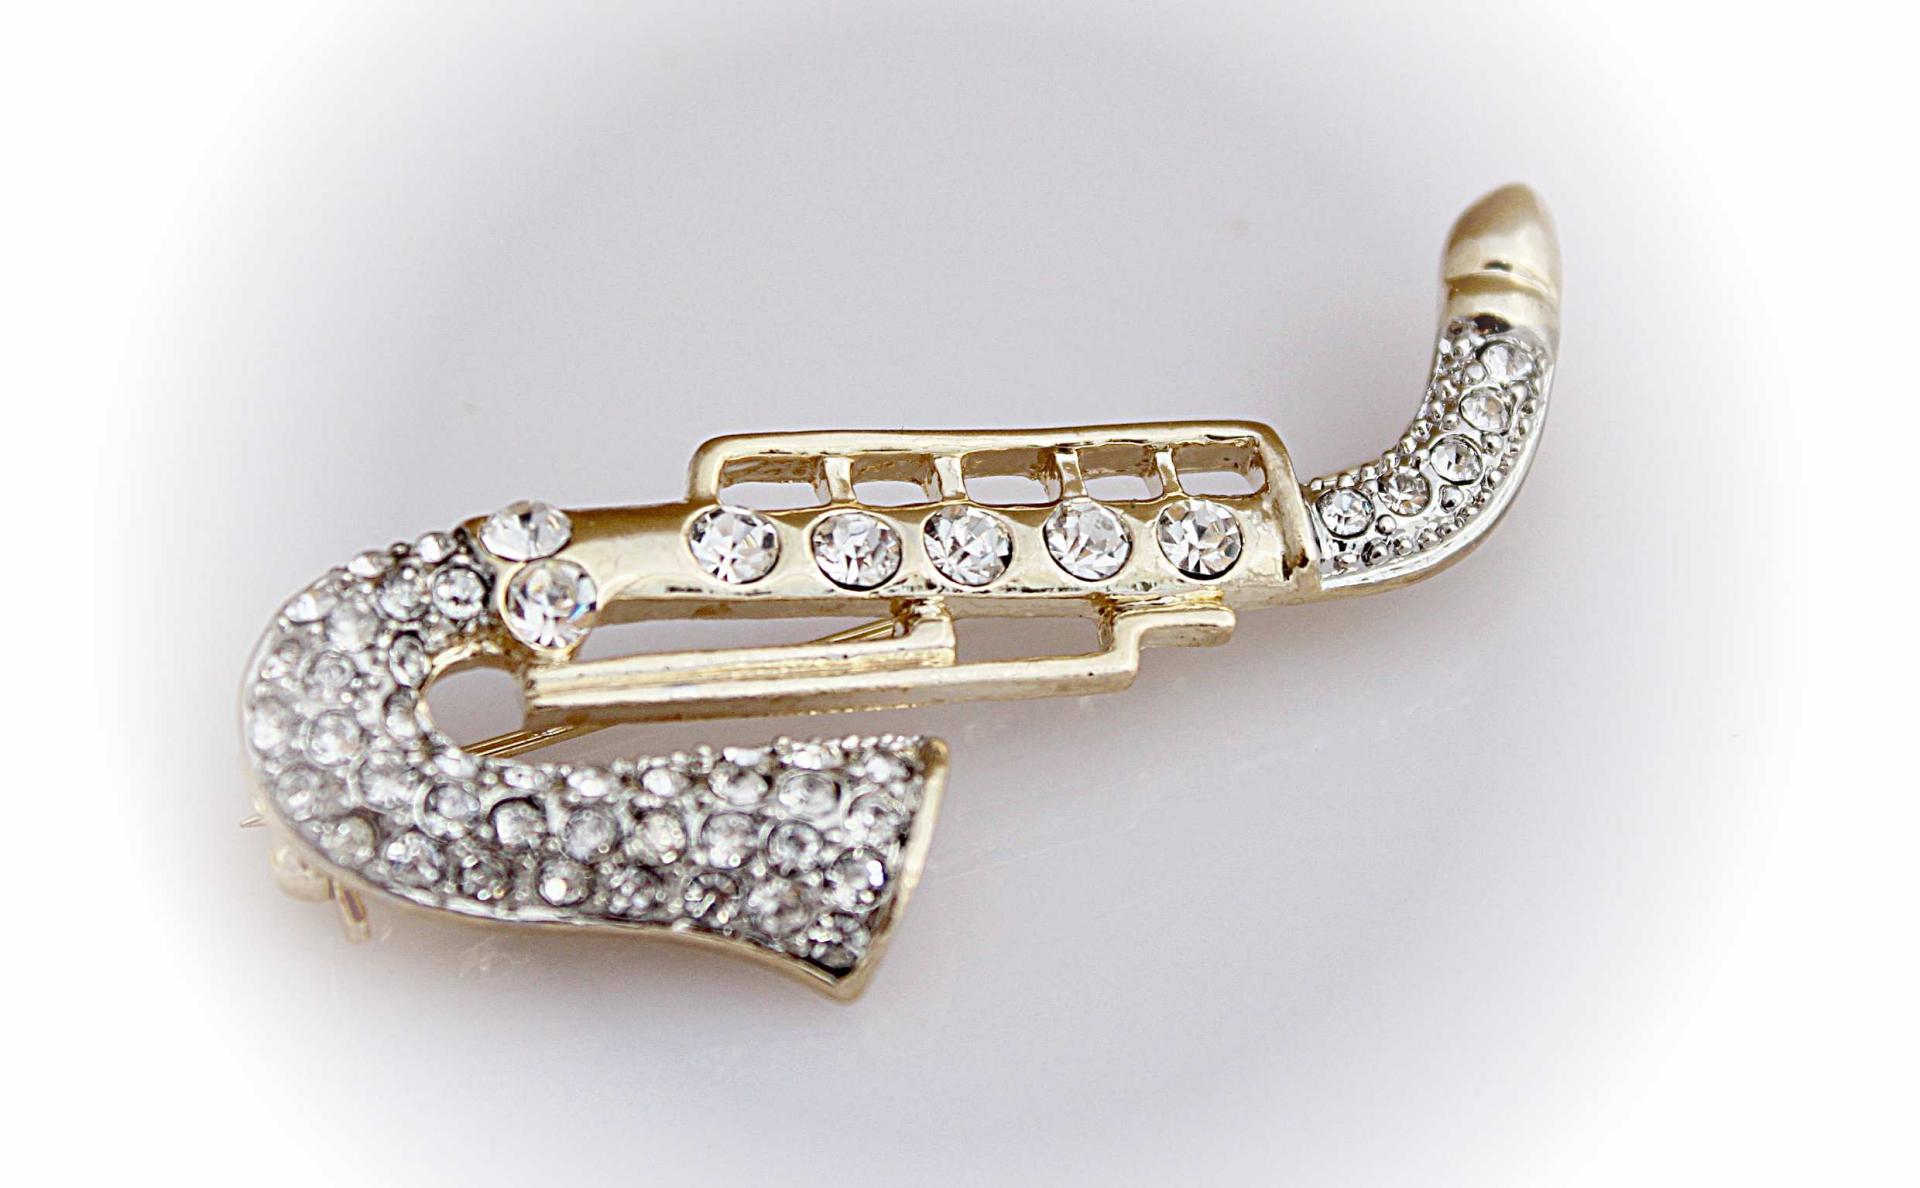 Saxophone Brooch With Crystal Stones